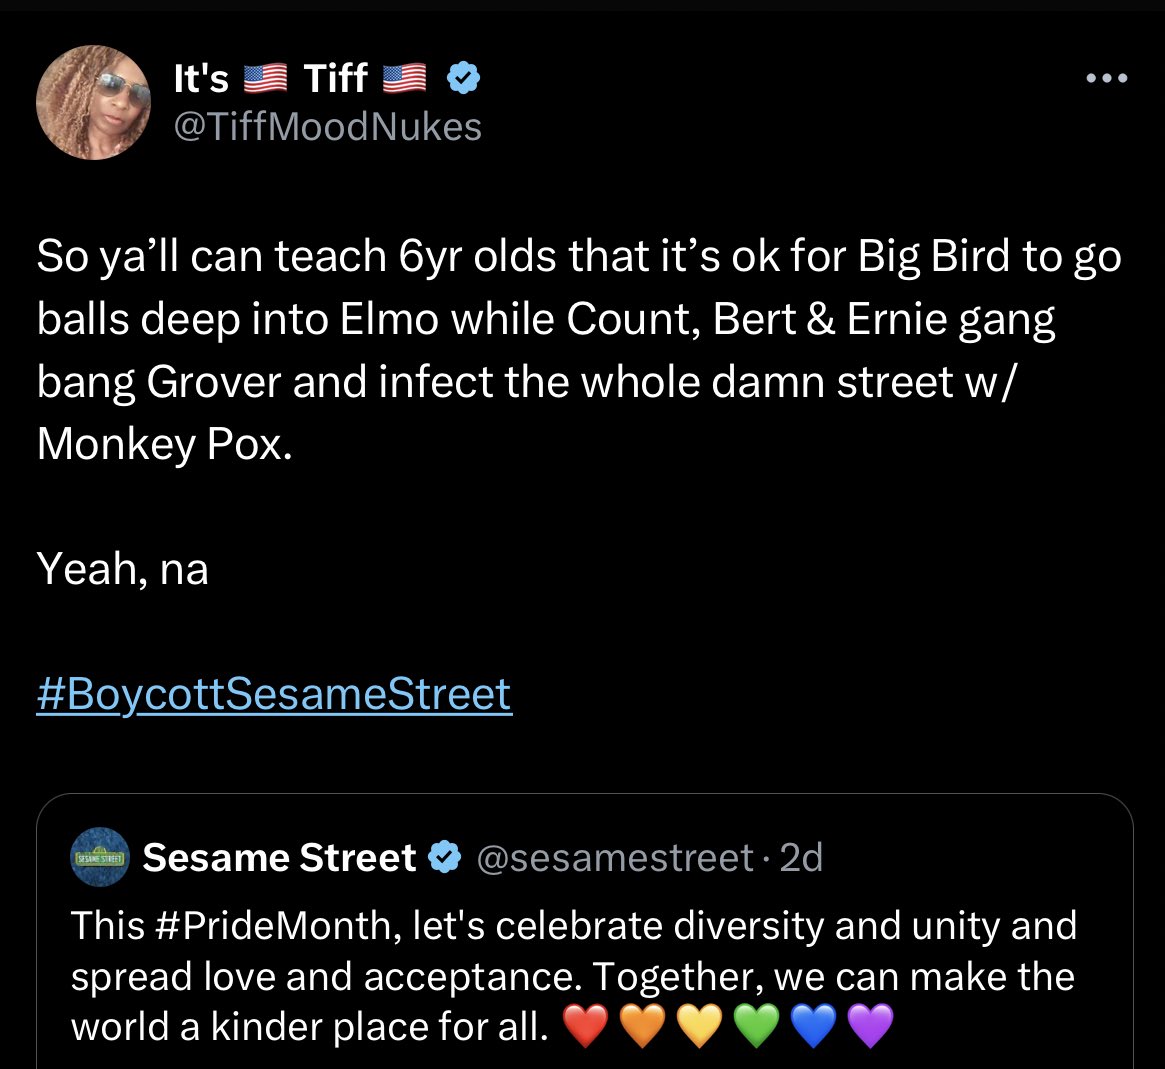 worst tweets of all time - king fahad's fountain - It's Tiff So ya'll can teach 6yr olds that it's ok for Big Bird to go balls deep into Elmo while Count, Bert & Ernie gang bang Grover and infect the whole damn street w Monkey Pox. Yeah, na Street Sesame 